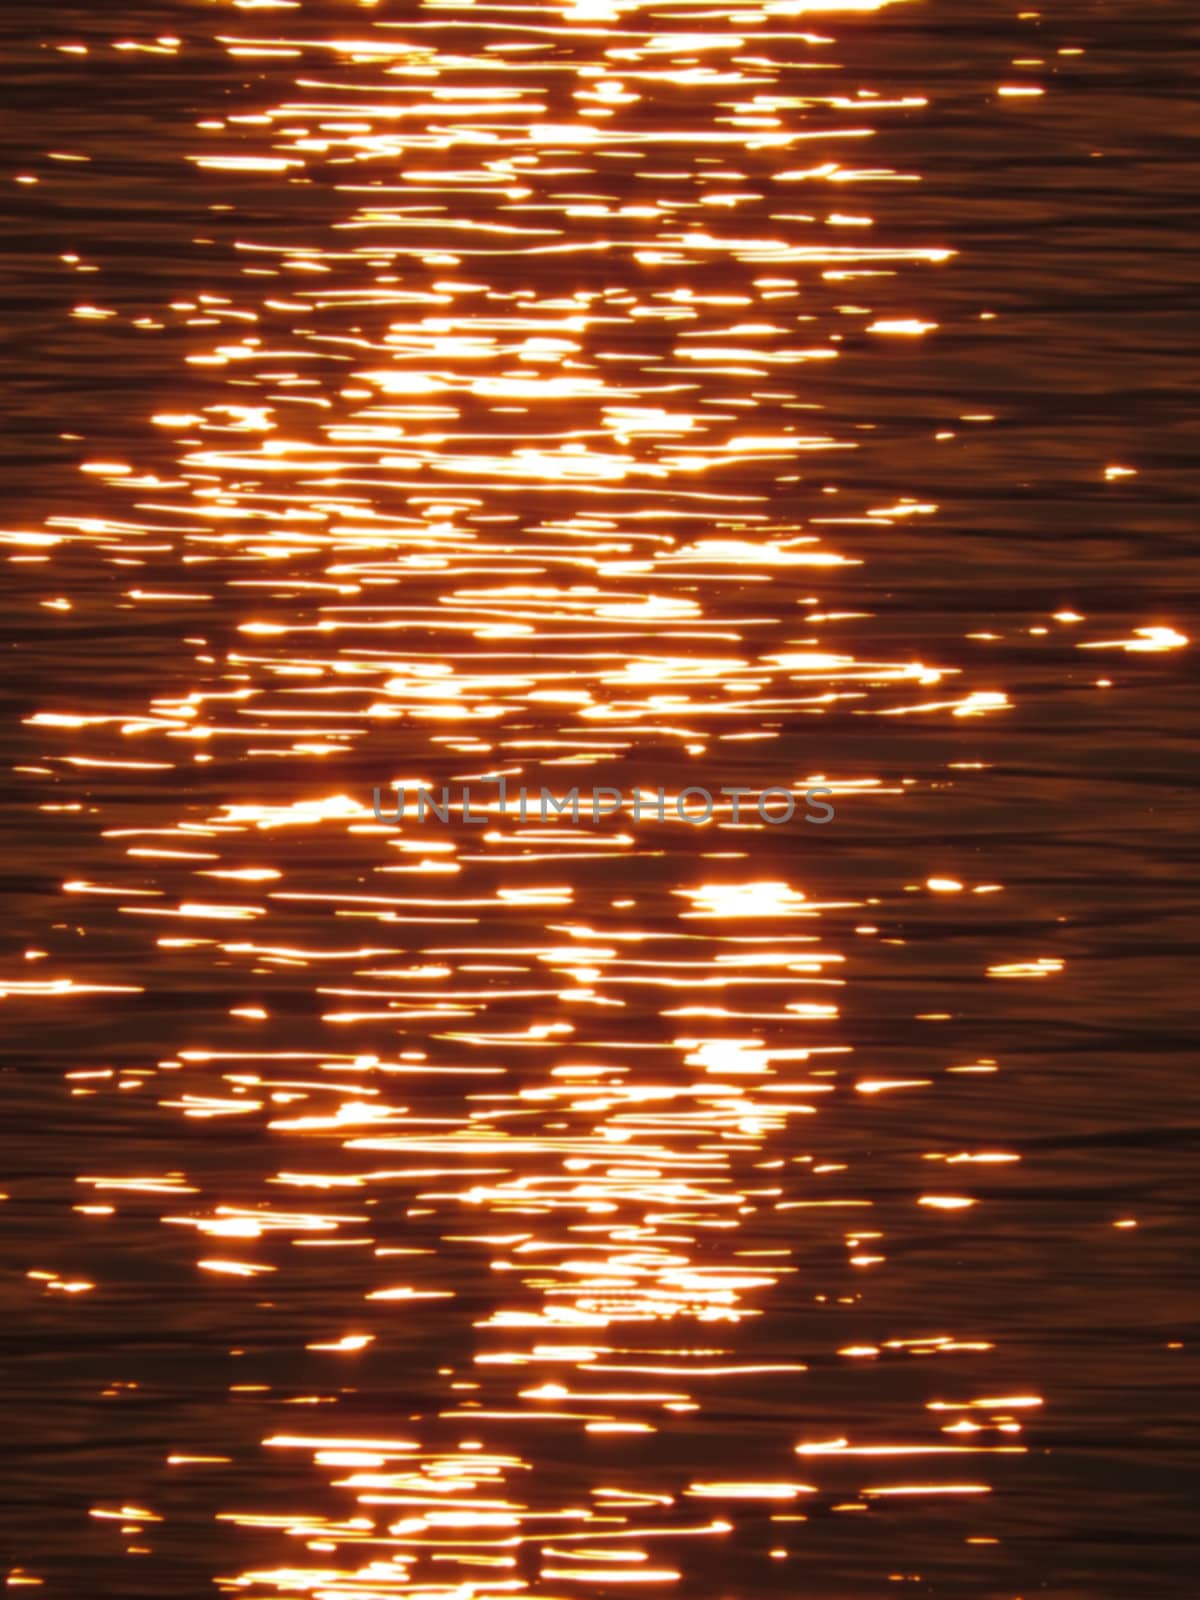 A pattern of Golden ripples shining in river water at sunset.                               